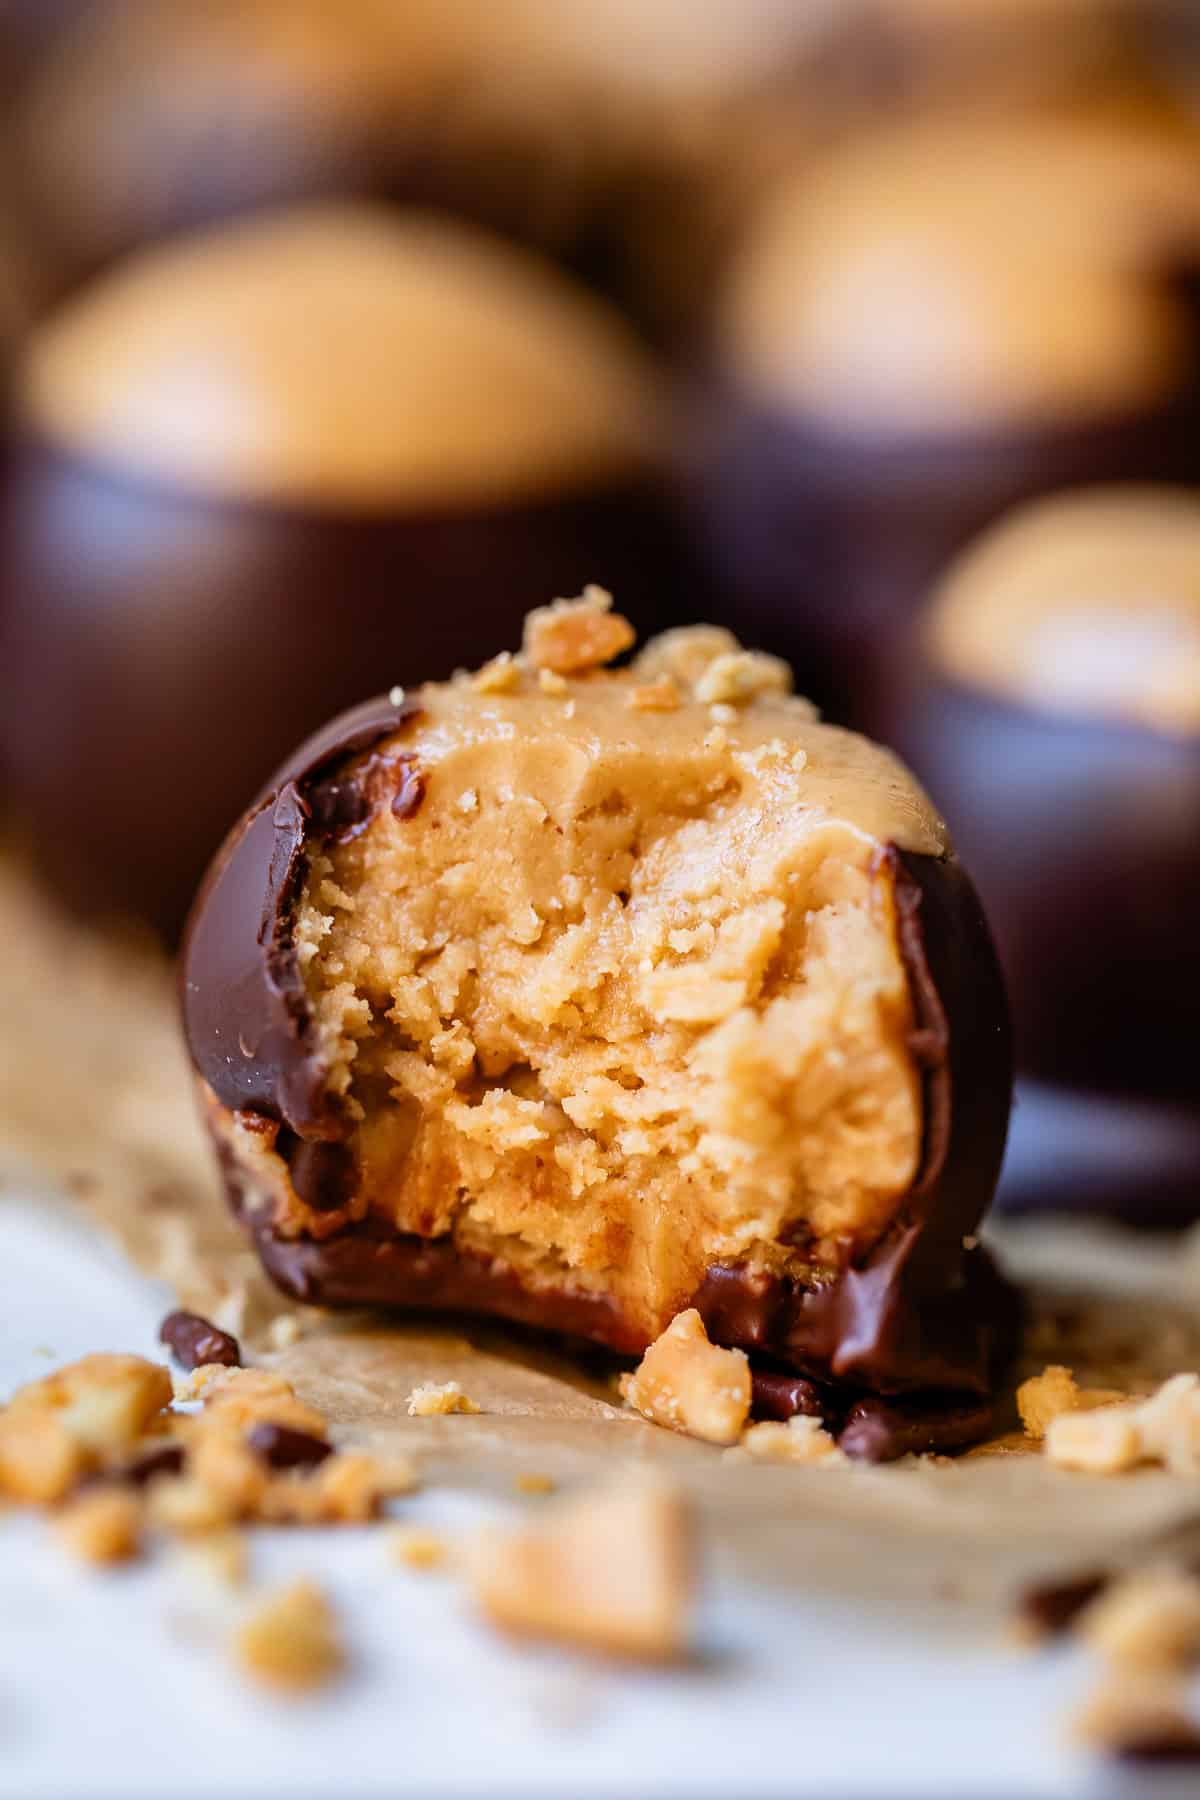 a peanut butter buckeye candy with a bite taken out.